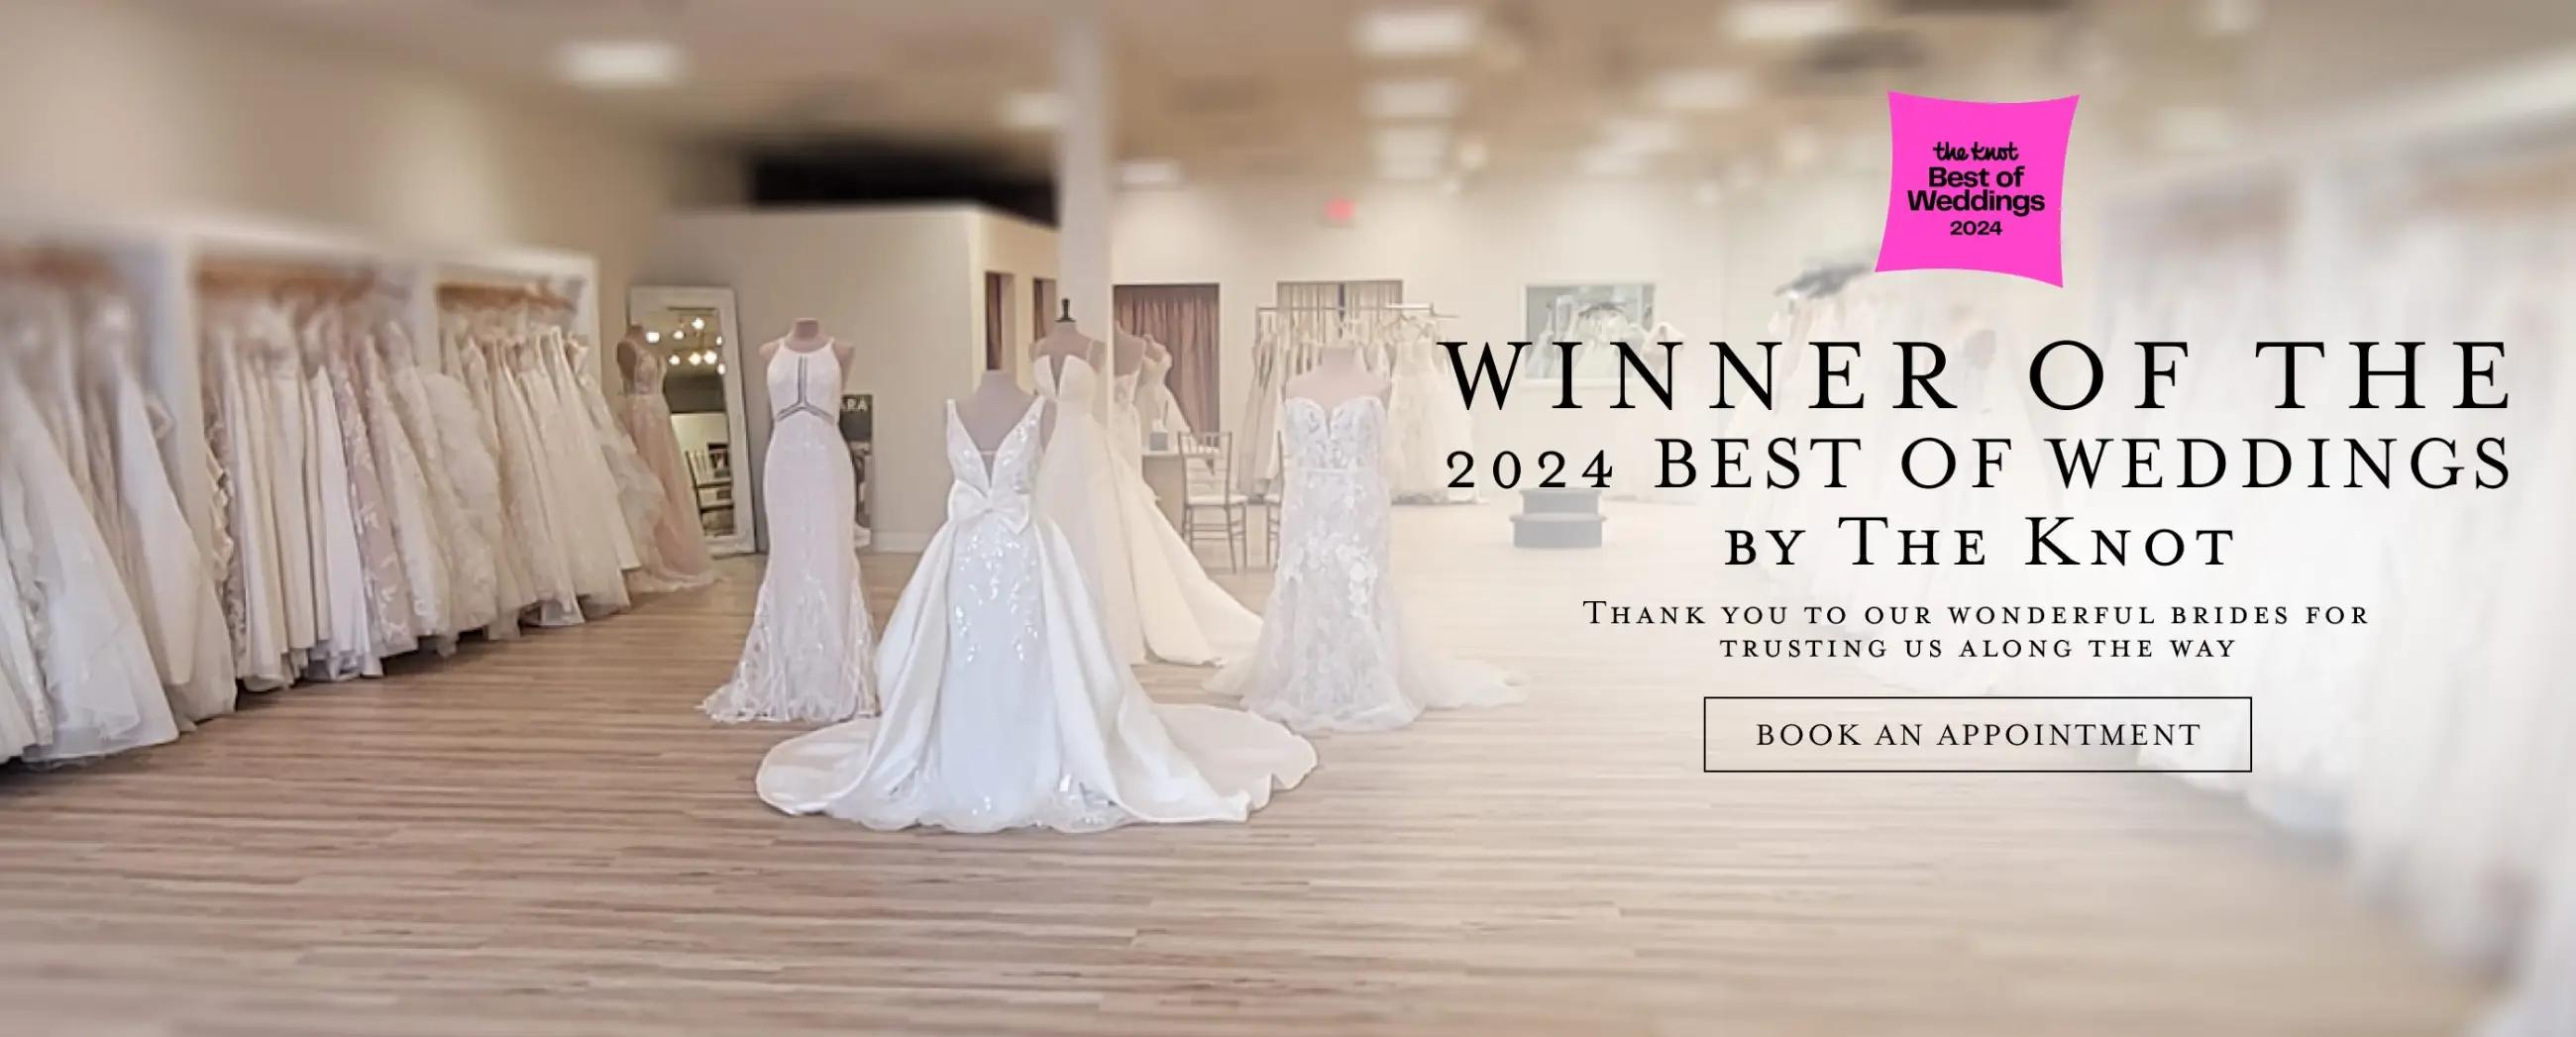 Bella Bridal Gallery is the winner of the 2024 Best of Wedding Knot award